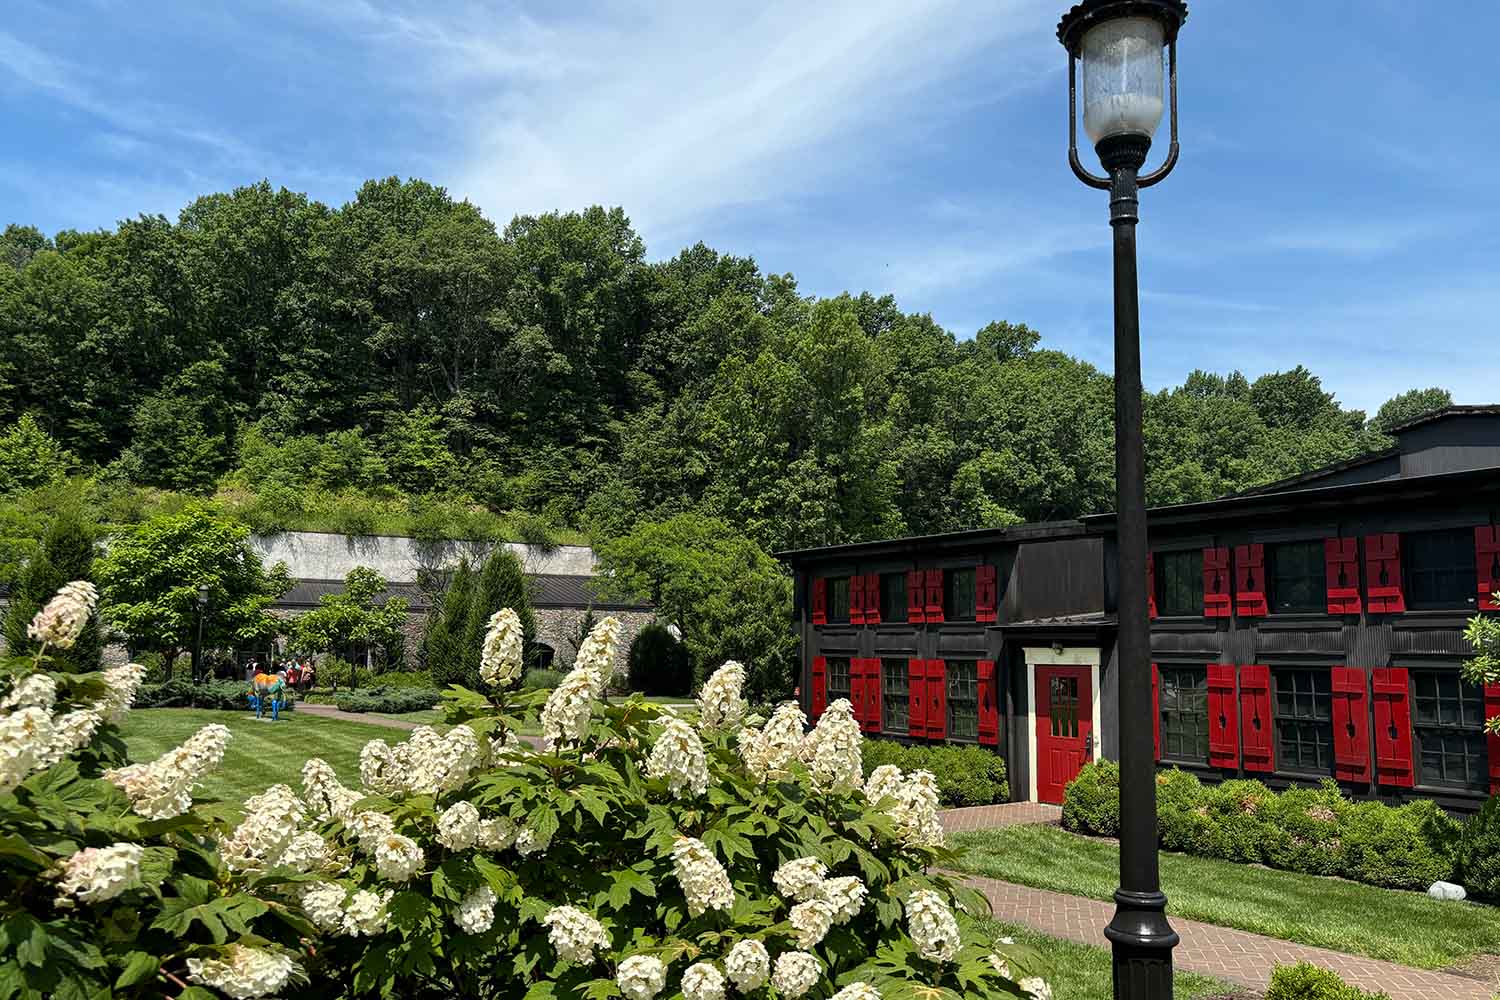 The campus at Maker's Mark